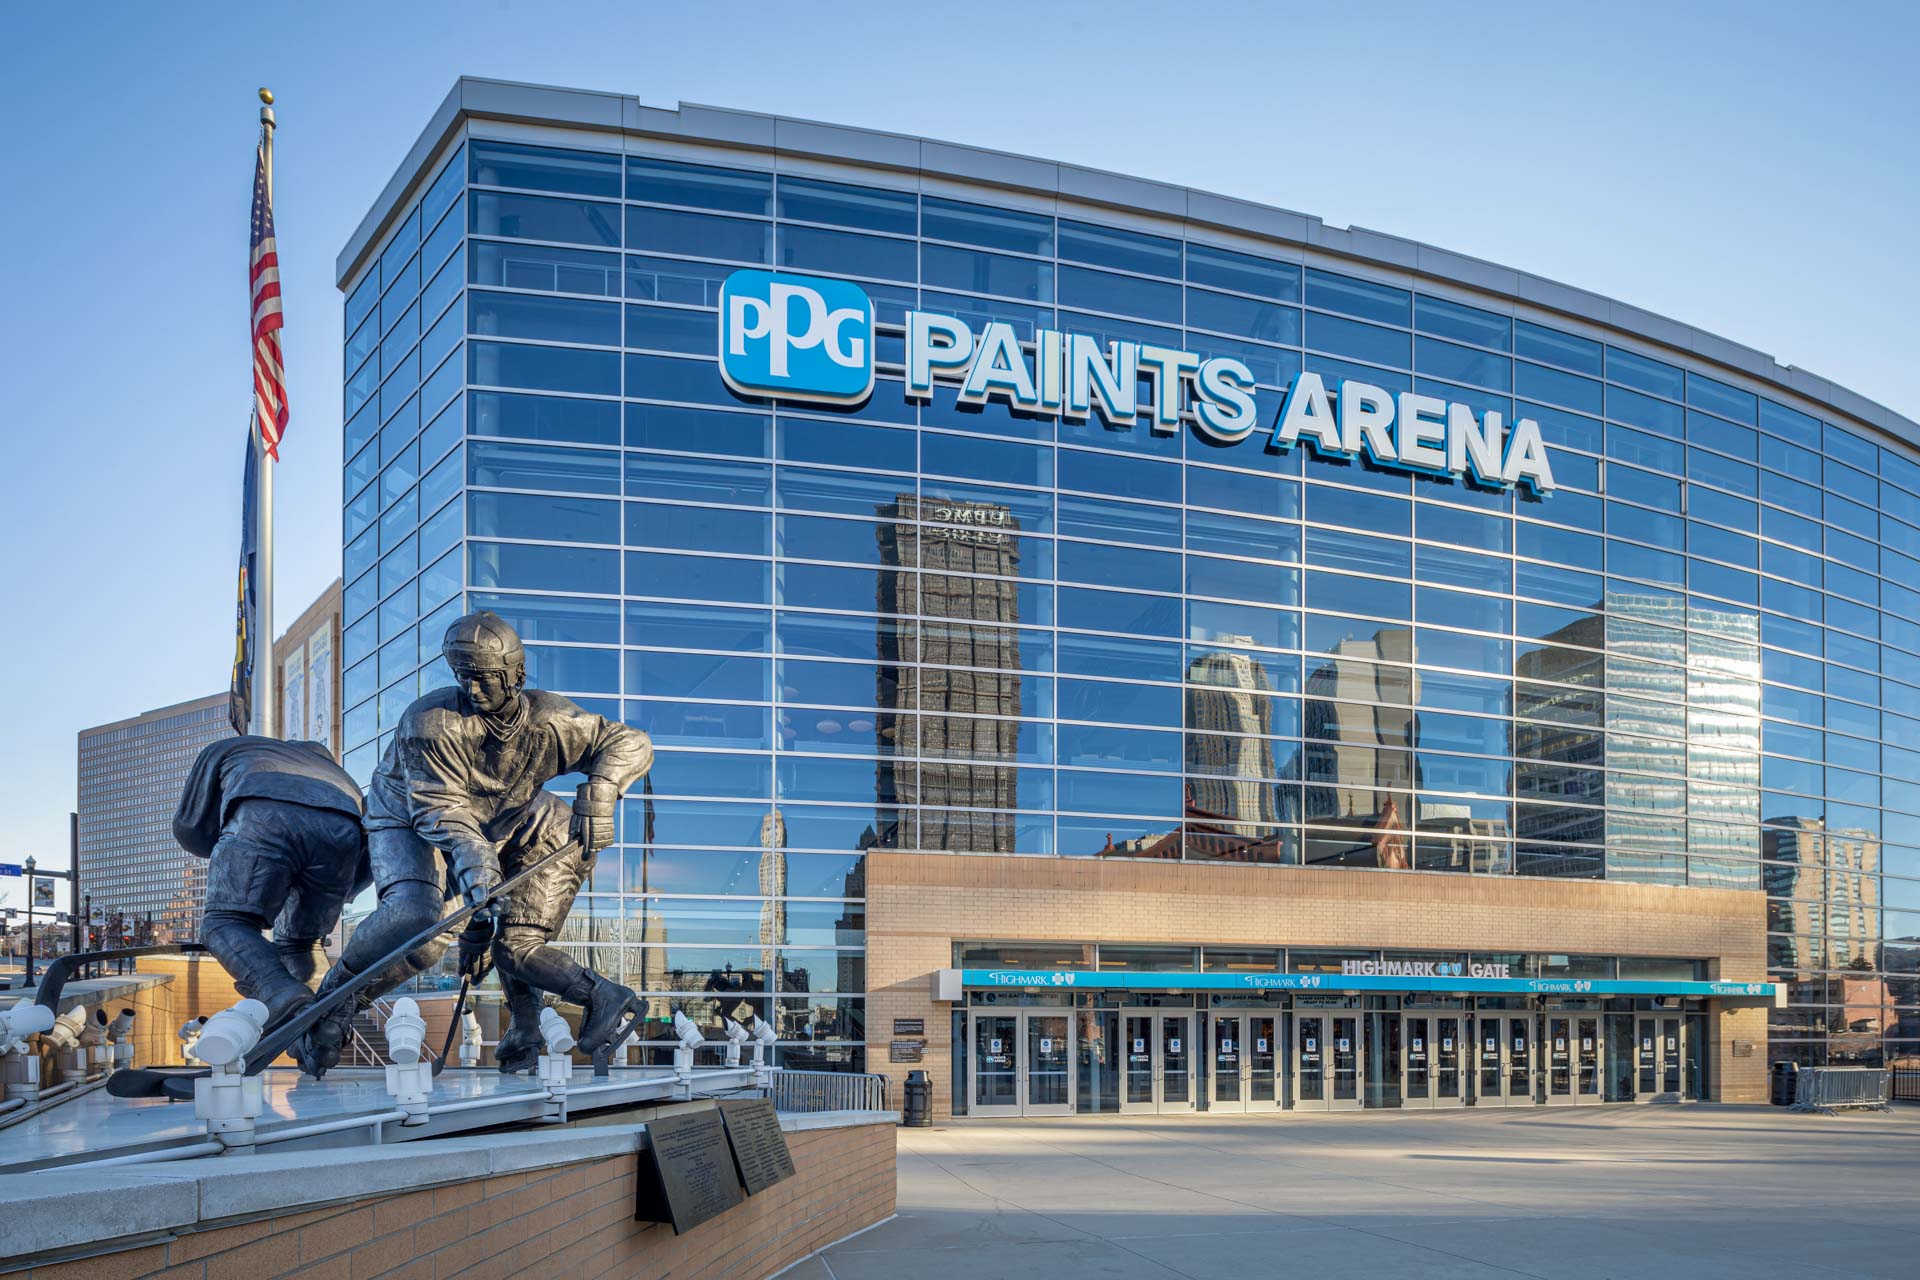 New, contactless concessions for PPG Paints Arena - ppnsolutions.com